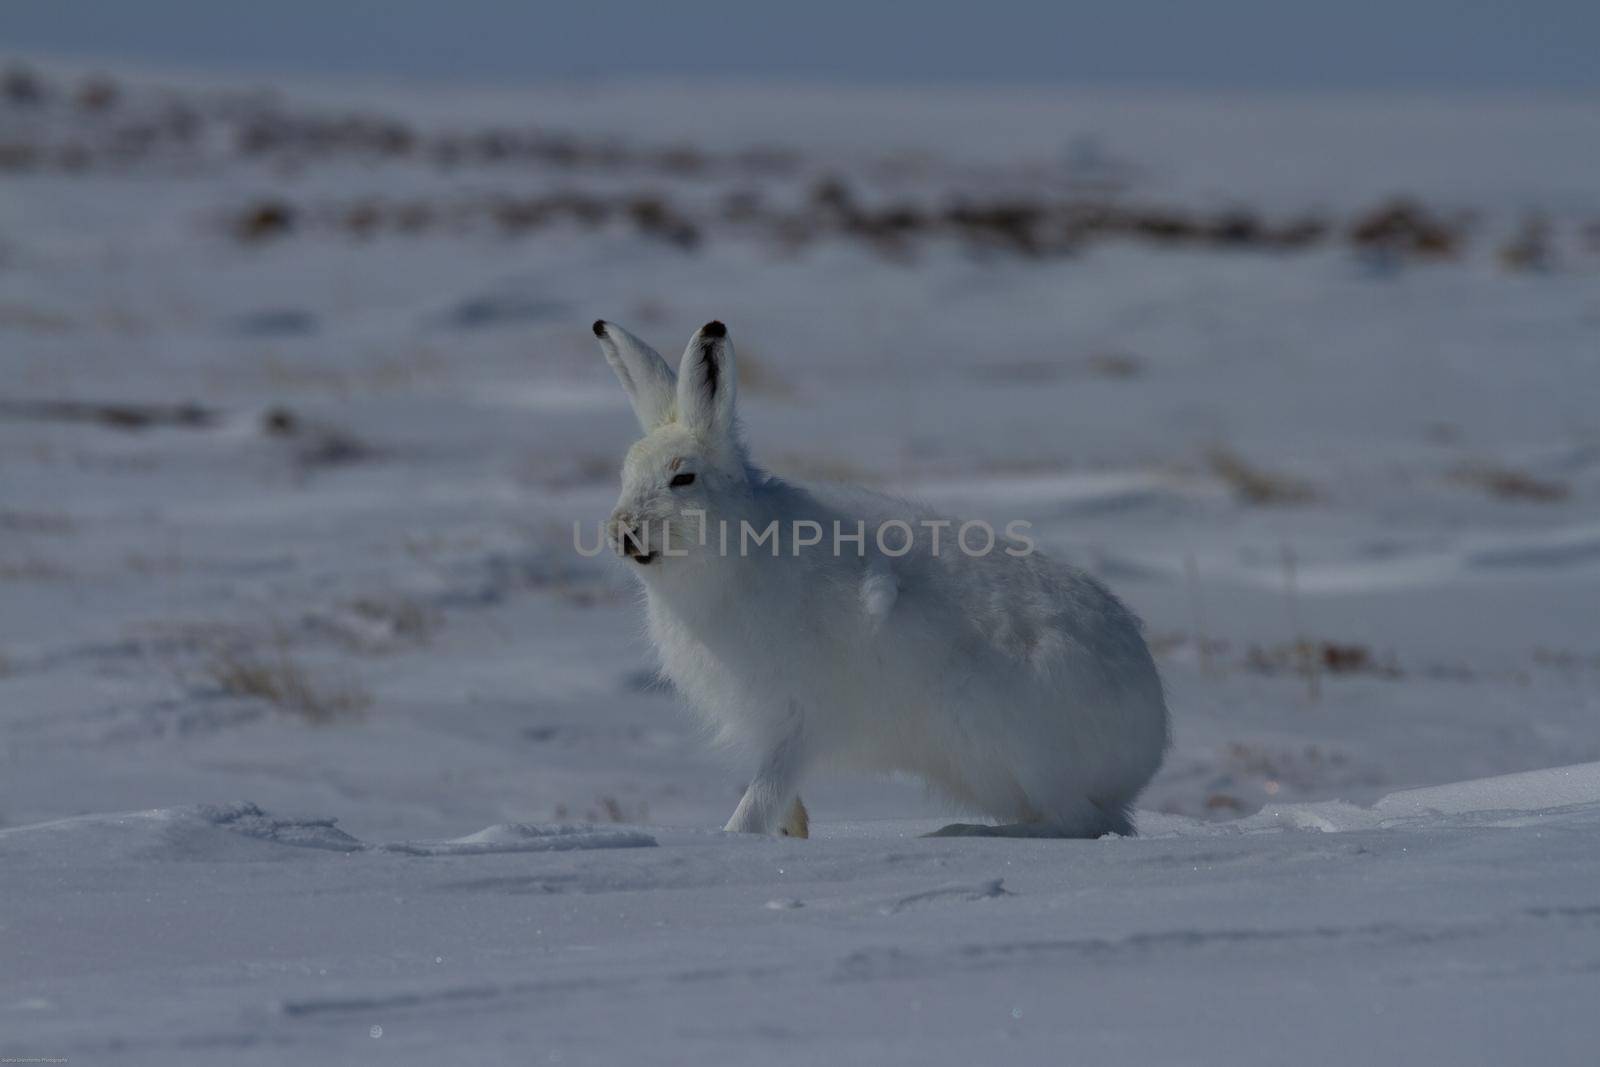 Arctic hare, Lepus arcticus, getting ready to jump while sitting on snow and shedding its winter coat, Nunavut Canada